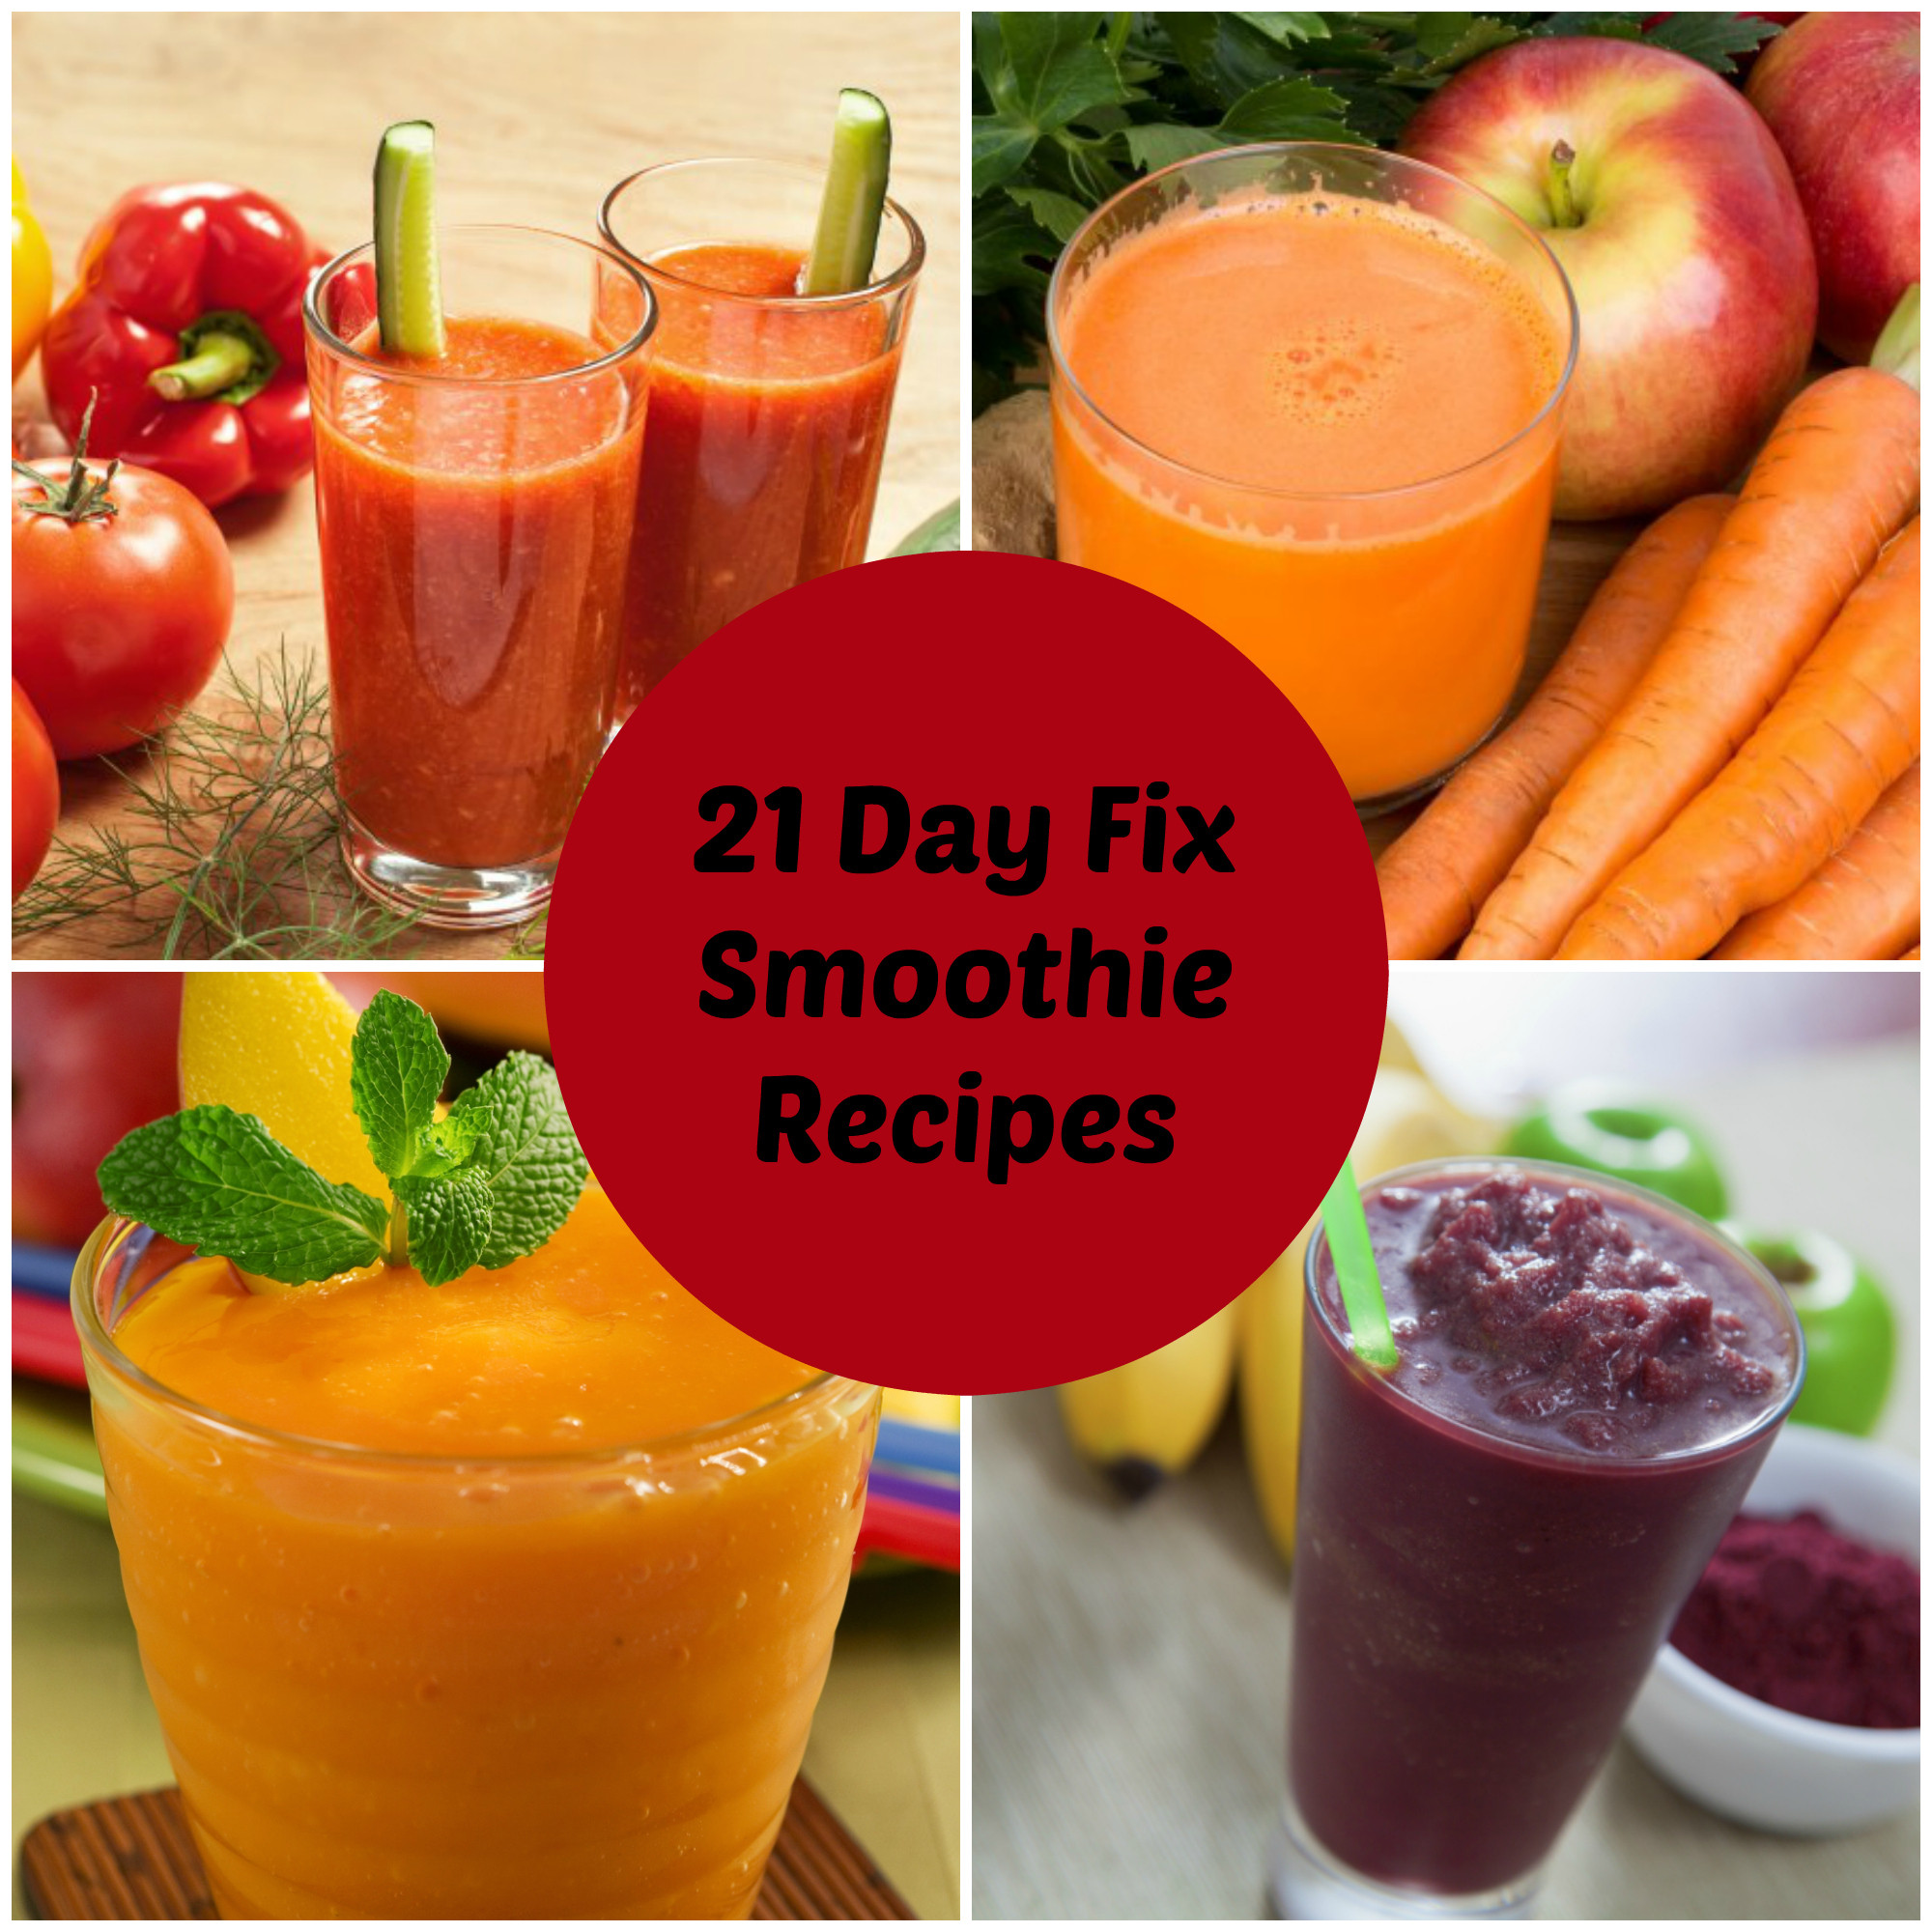 Best Fast Food Smoothies
 How to Make Smoothies for the 21 Day Fix All Nutribullet